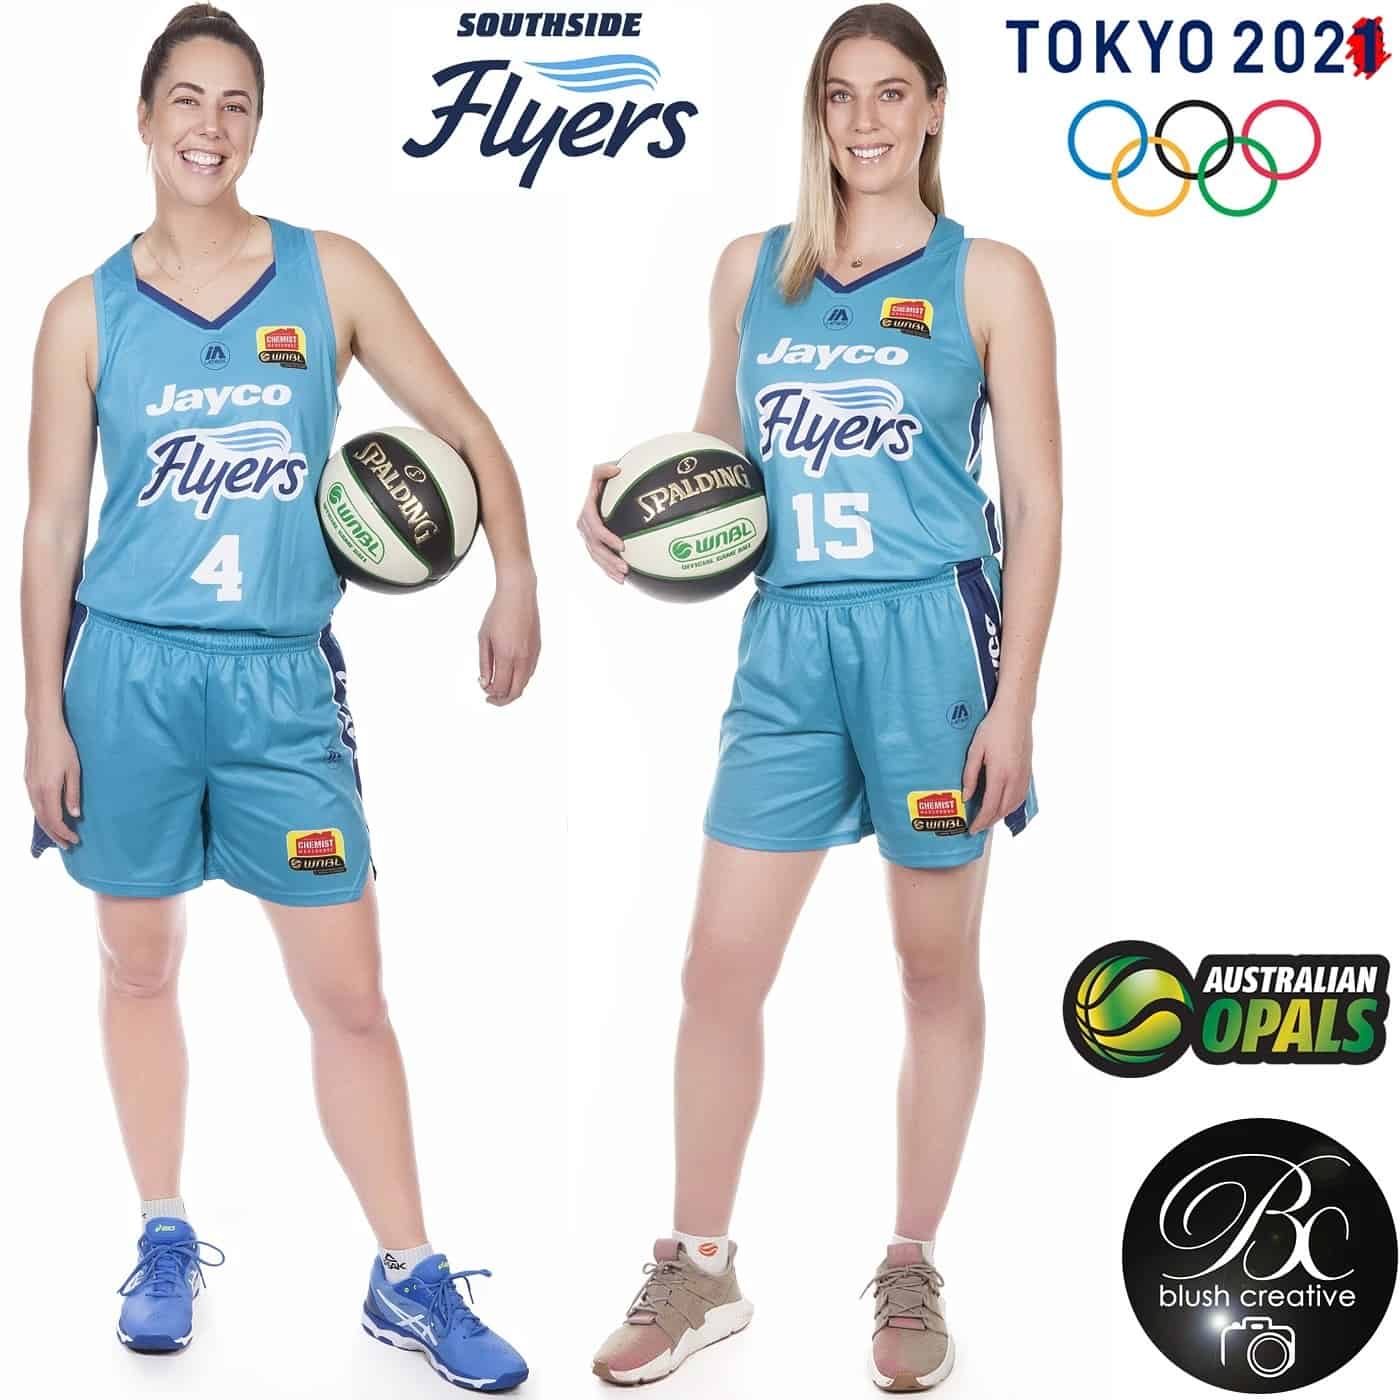 @blushcreativeau is so proud to have photographed two of the Opals Women's Basketball Olympic team members - Sara Blicavs #sarablicavs and Southside Flyers captain Jenna O'Hea #jennaohea who represented Australia in the 2021 Tokyo Olympics and made it to the quarter finals. They are a shining example of persevering through adversity. Never give up! #aus_opals #southside.flyers #GoOpals #TokyoTogether #olympics2021tokyo #olympics #aussieopals #ausolympicteam #basketballaus #opalsbasketball #tokyo_olympic_2021_official

Photo shoot inquiries
📧 info@blush.com.au
or ☎️ (03) 9826 8655 .
Website: www.blush.com.au